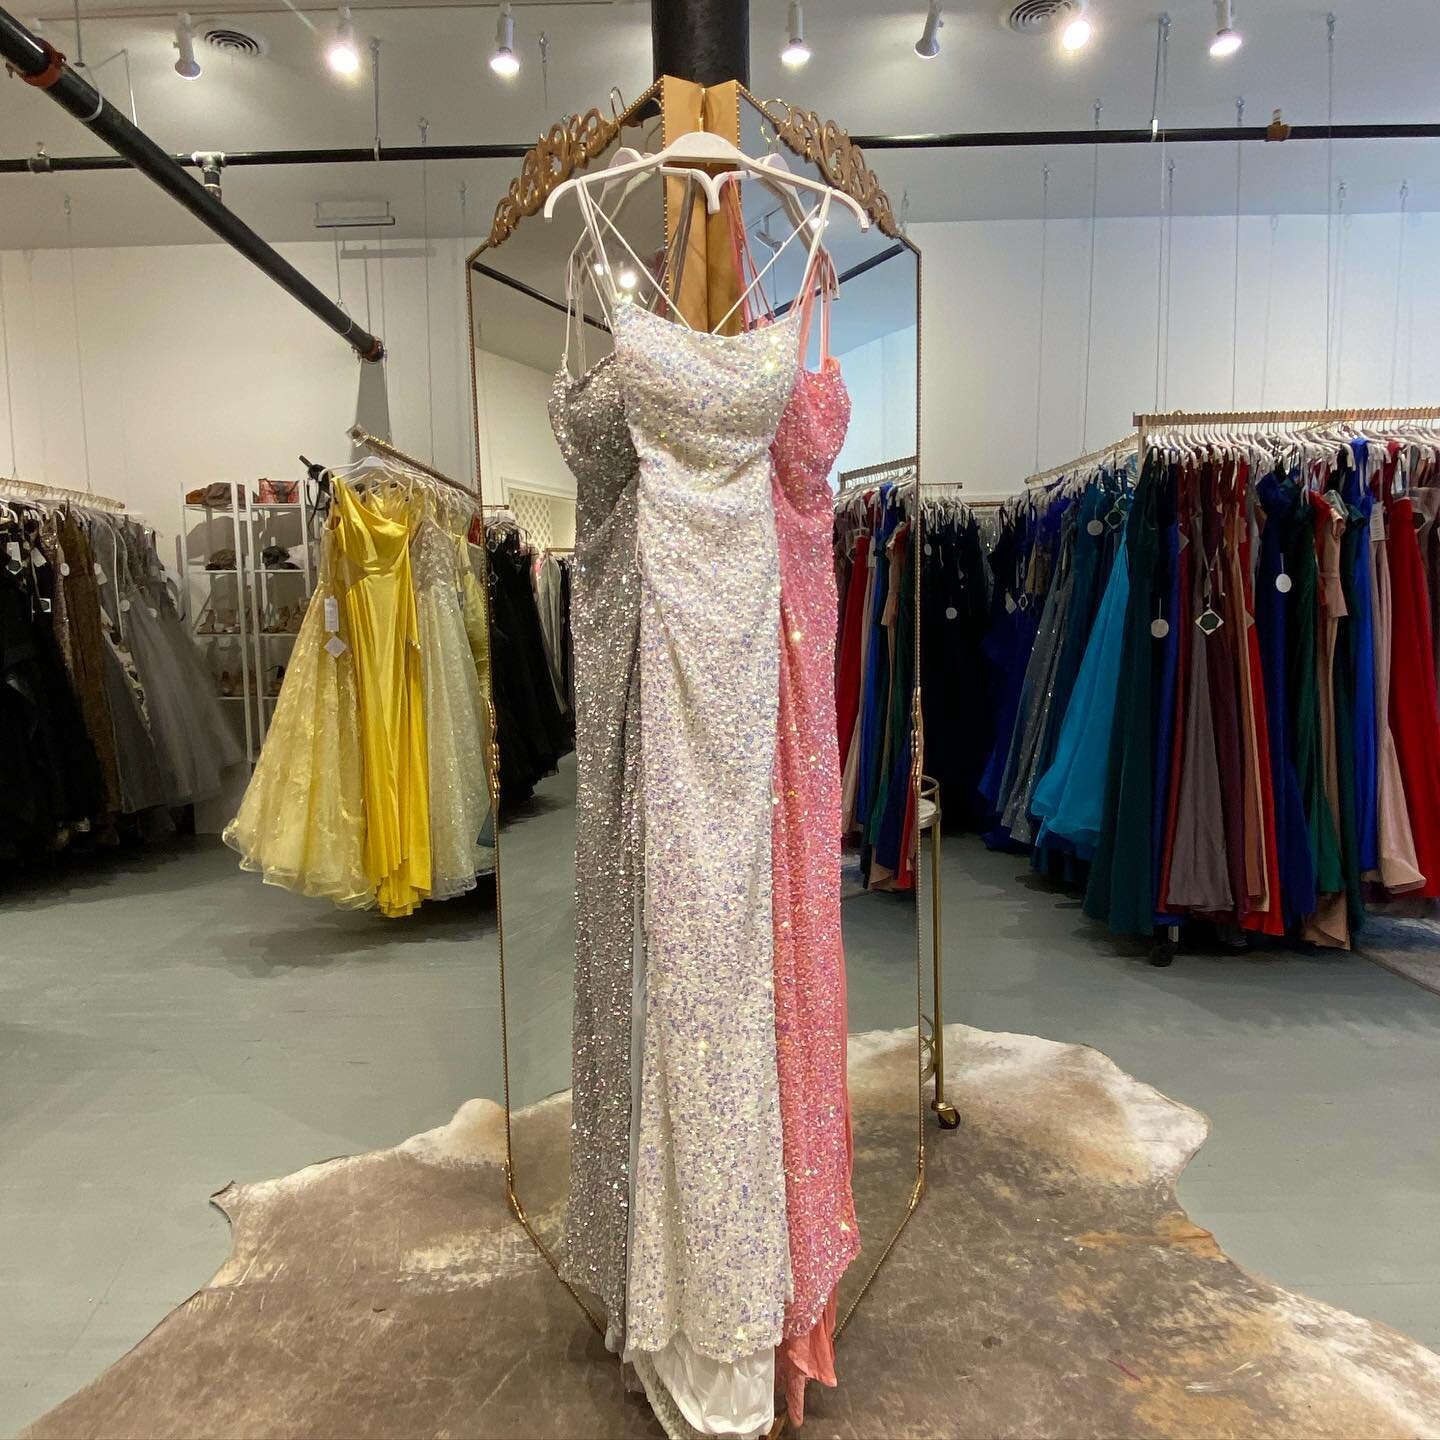 ASHLEY just knows DRESSES!!!🤍🤍🤍 Everyone&rsquo;s FAVORITE!!! @ashleylauren .
.
.
.
#houseofkboutique #houseofk #dresses#gowns #prom #homecoming #gala #dress #style #fashion #sparkle #sequins #newalbany #indianaboutique #shoptlocal #wedding #bridal